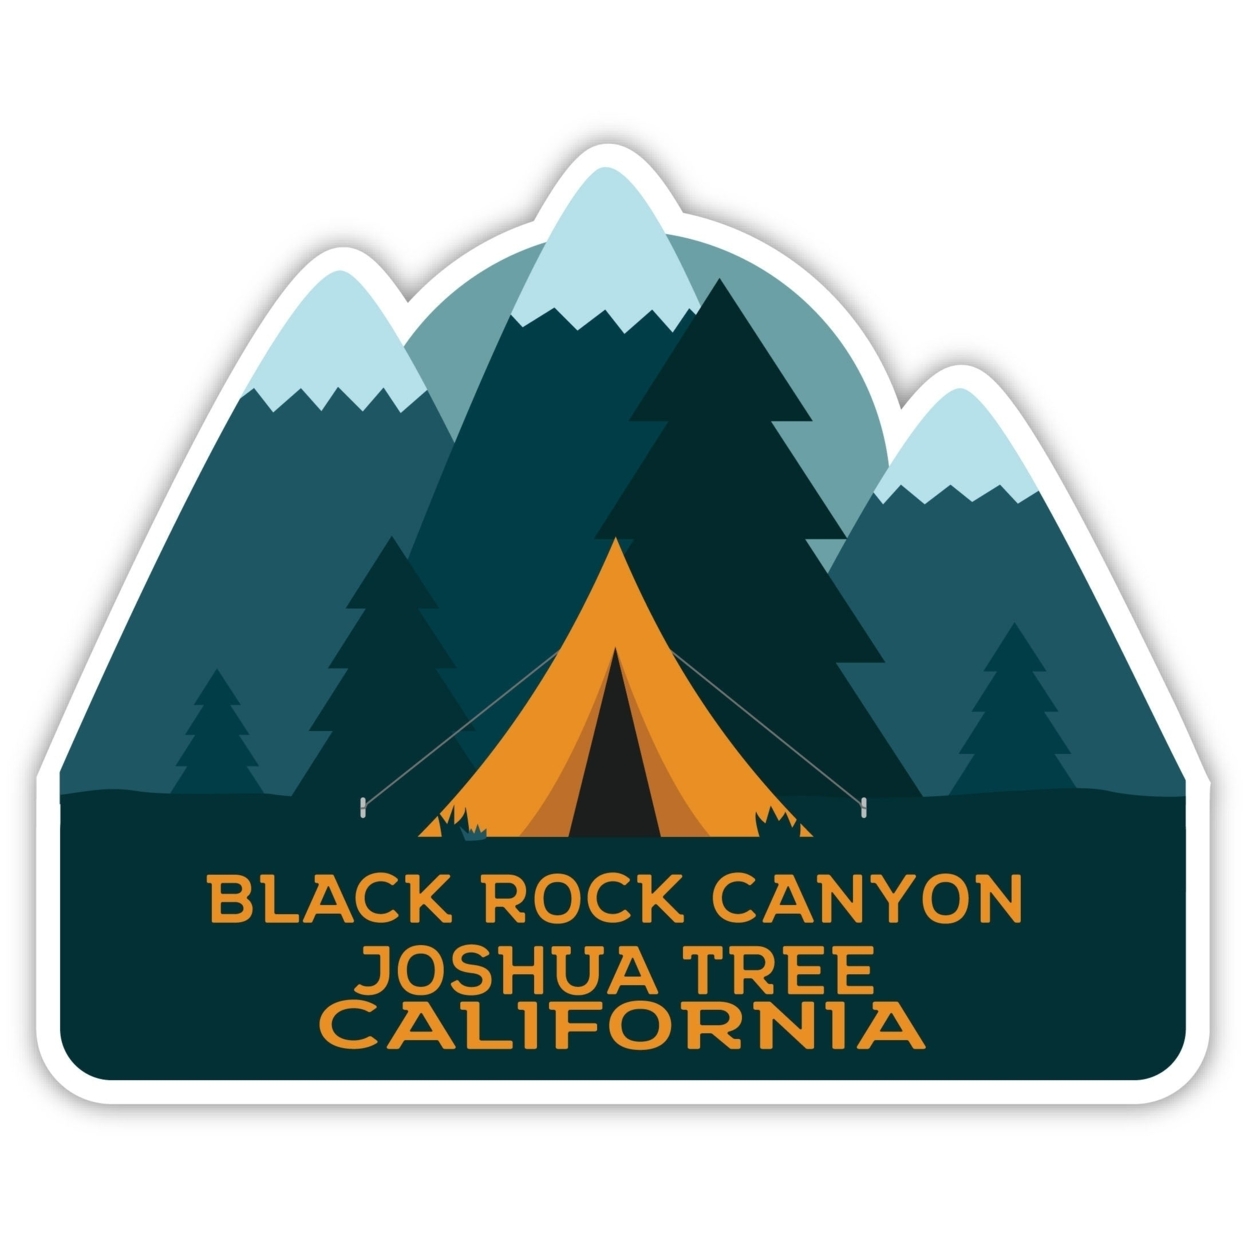 Black Rock Canyon Joshua Tree California Souvenir Decorative Stickers (Choose Theme And Size) - 4-Pack, 4-Inch, Tent